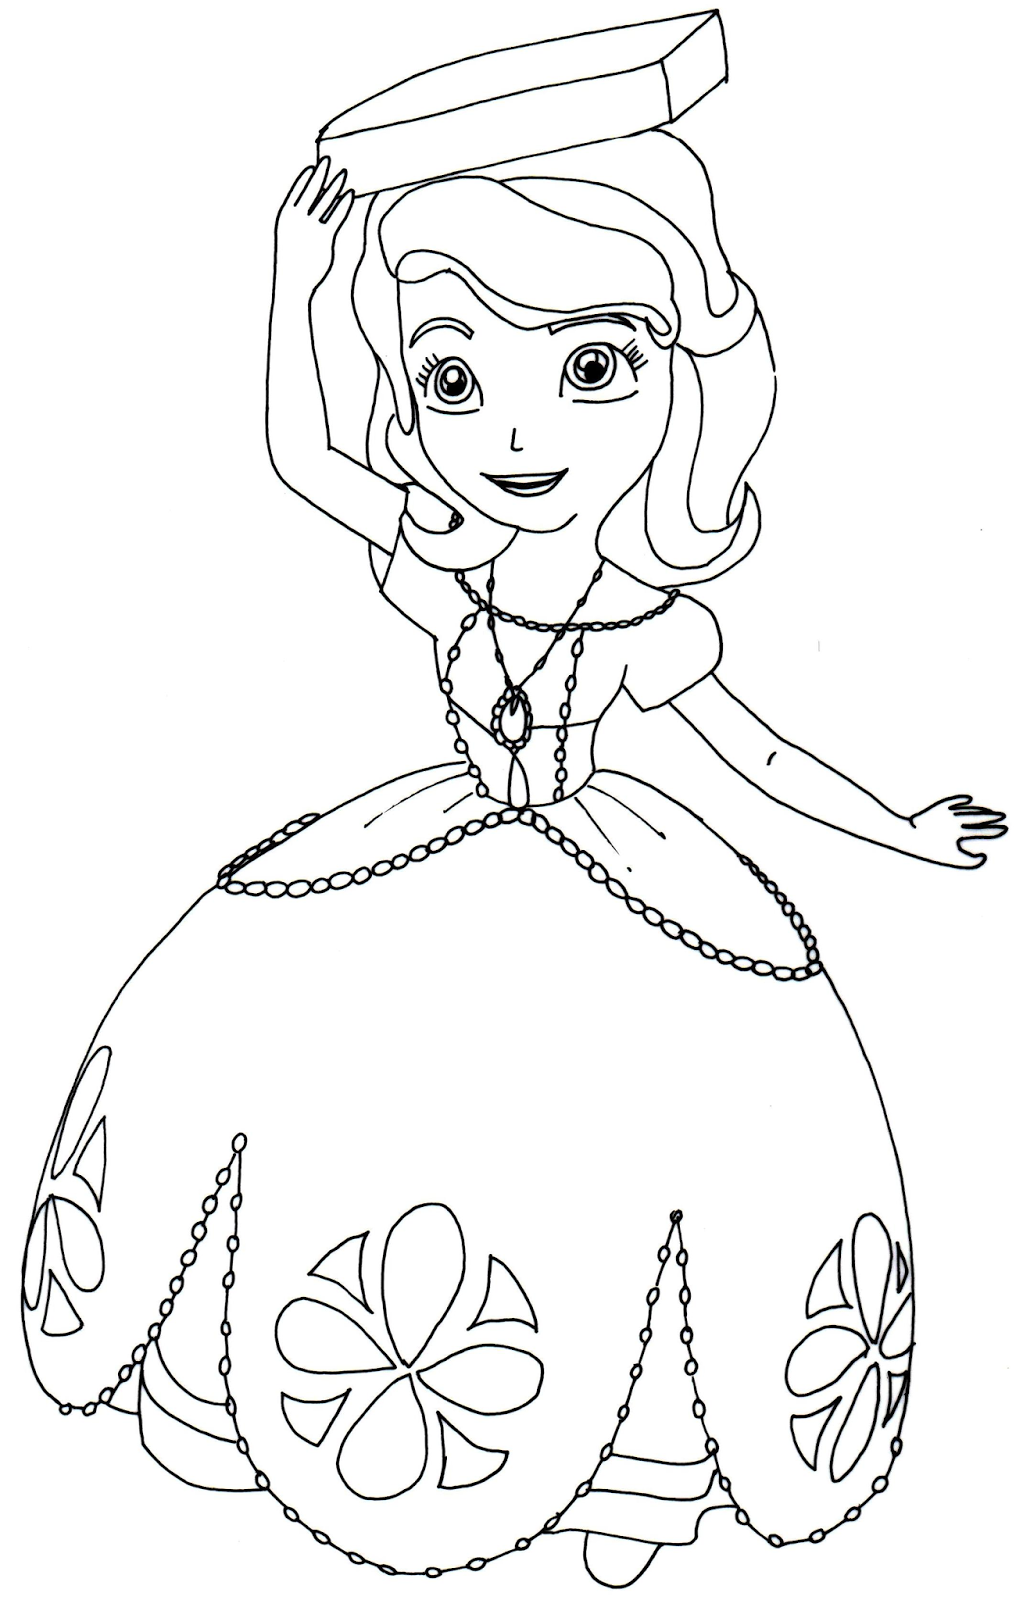 Sofia The First Coloring Pages: Perfect Posture - Sofia the First